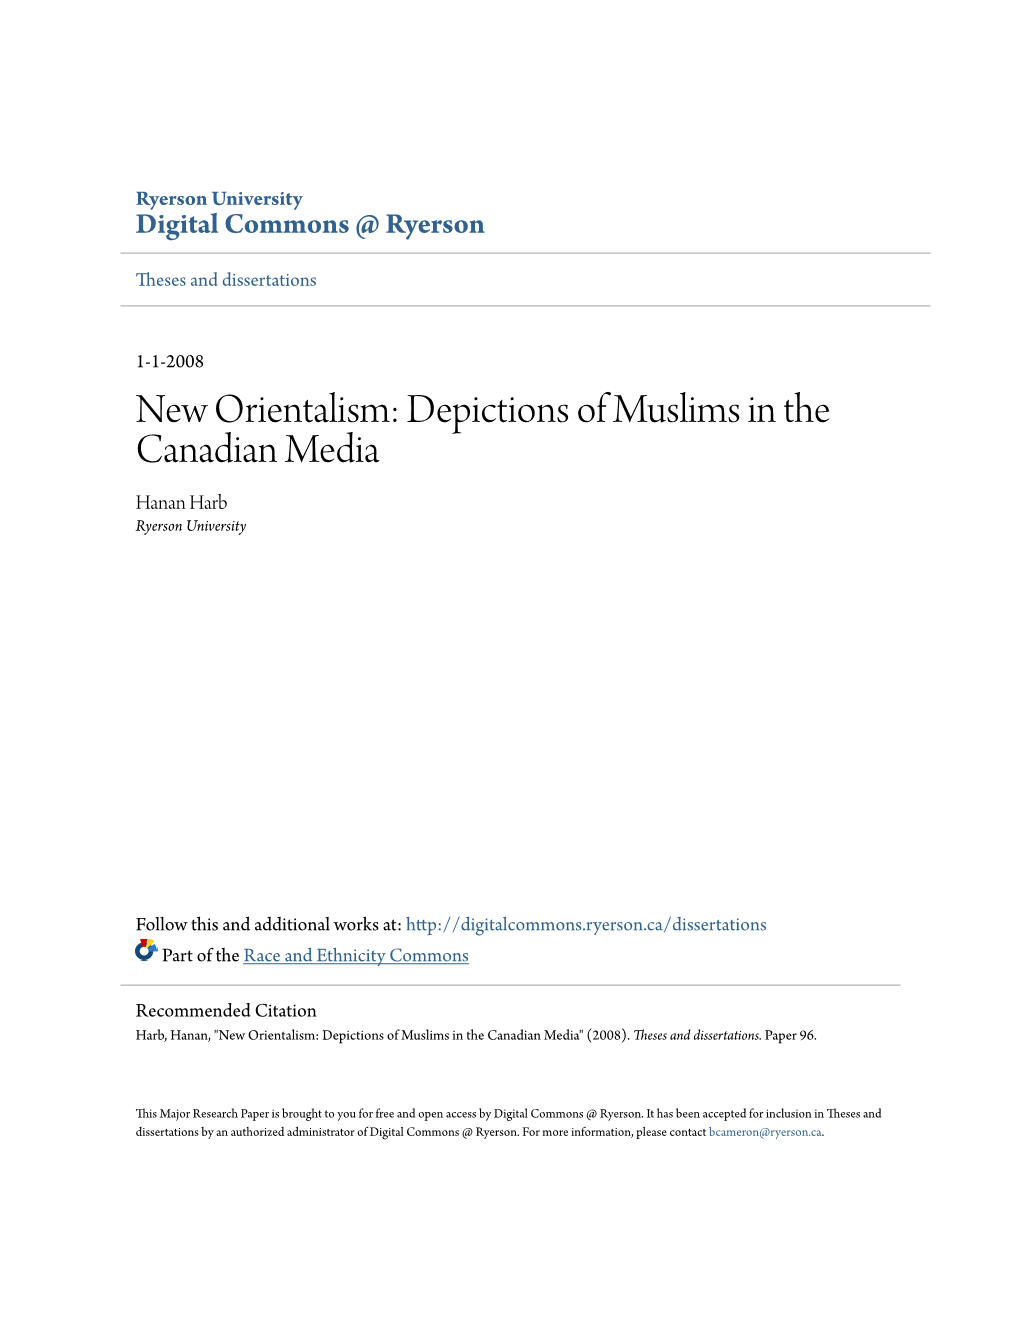 New Orientalism: Depictions of Muslims in the Canadian Media Hanan Harb Ryerson University